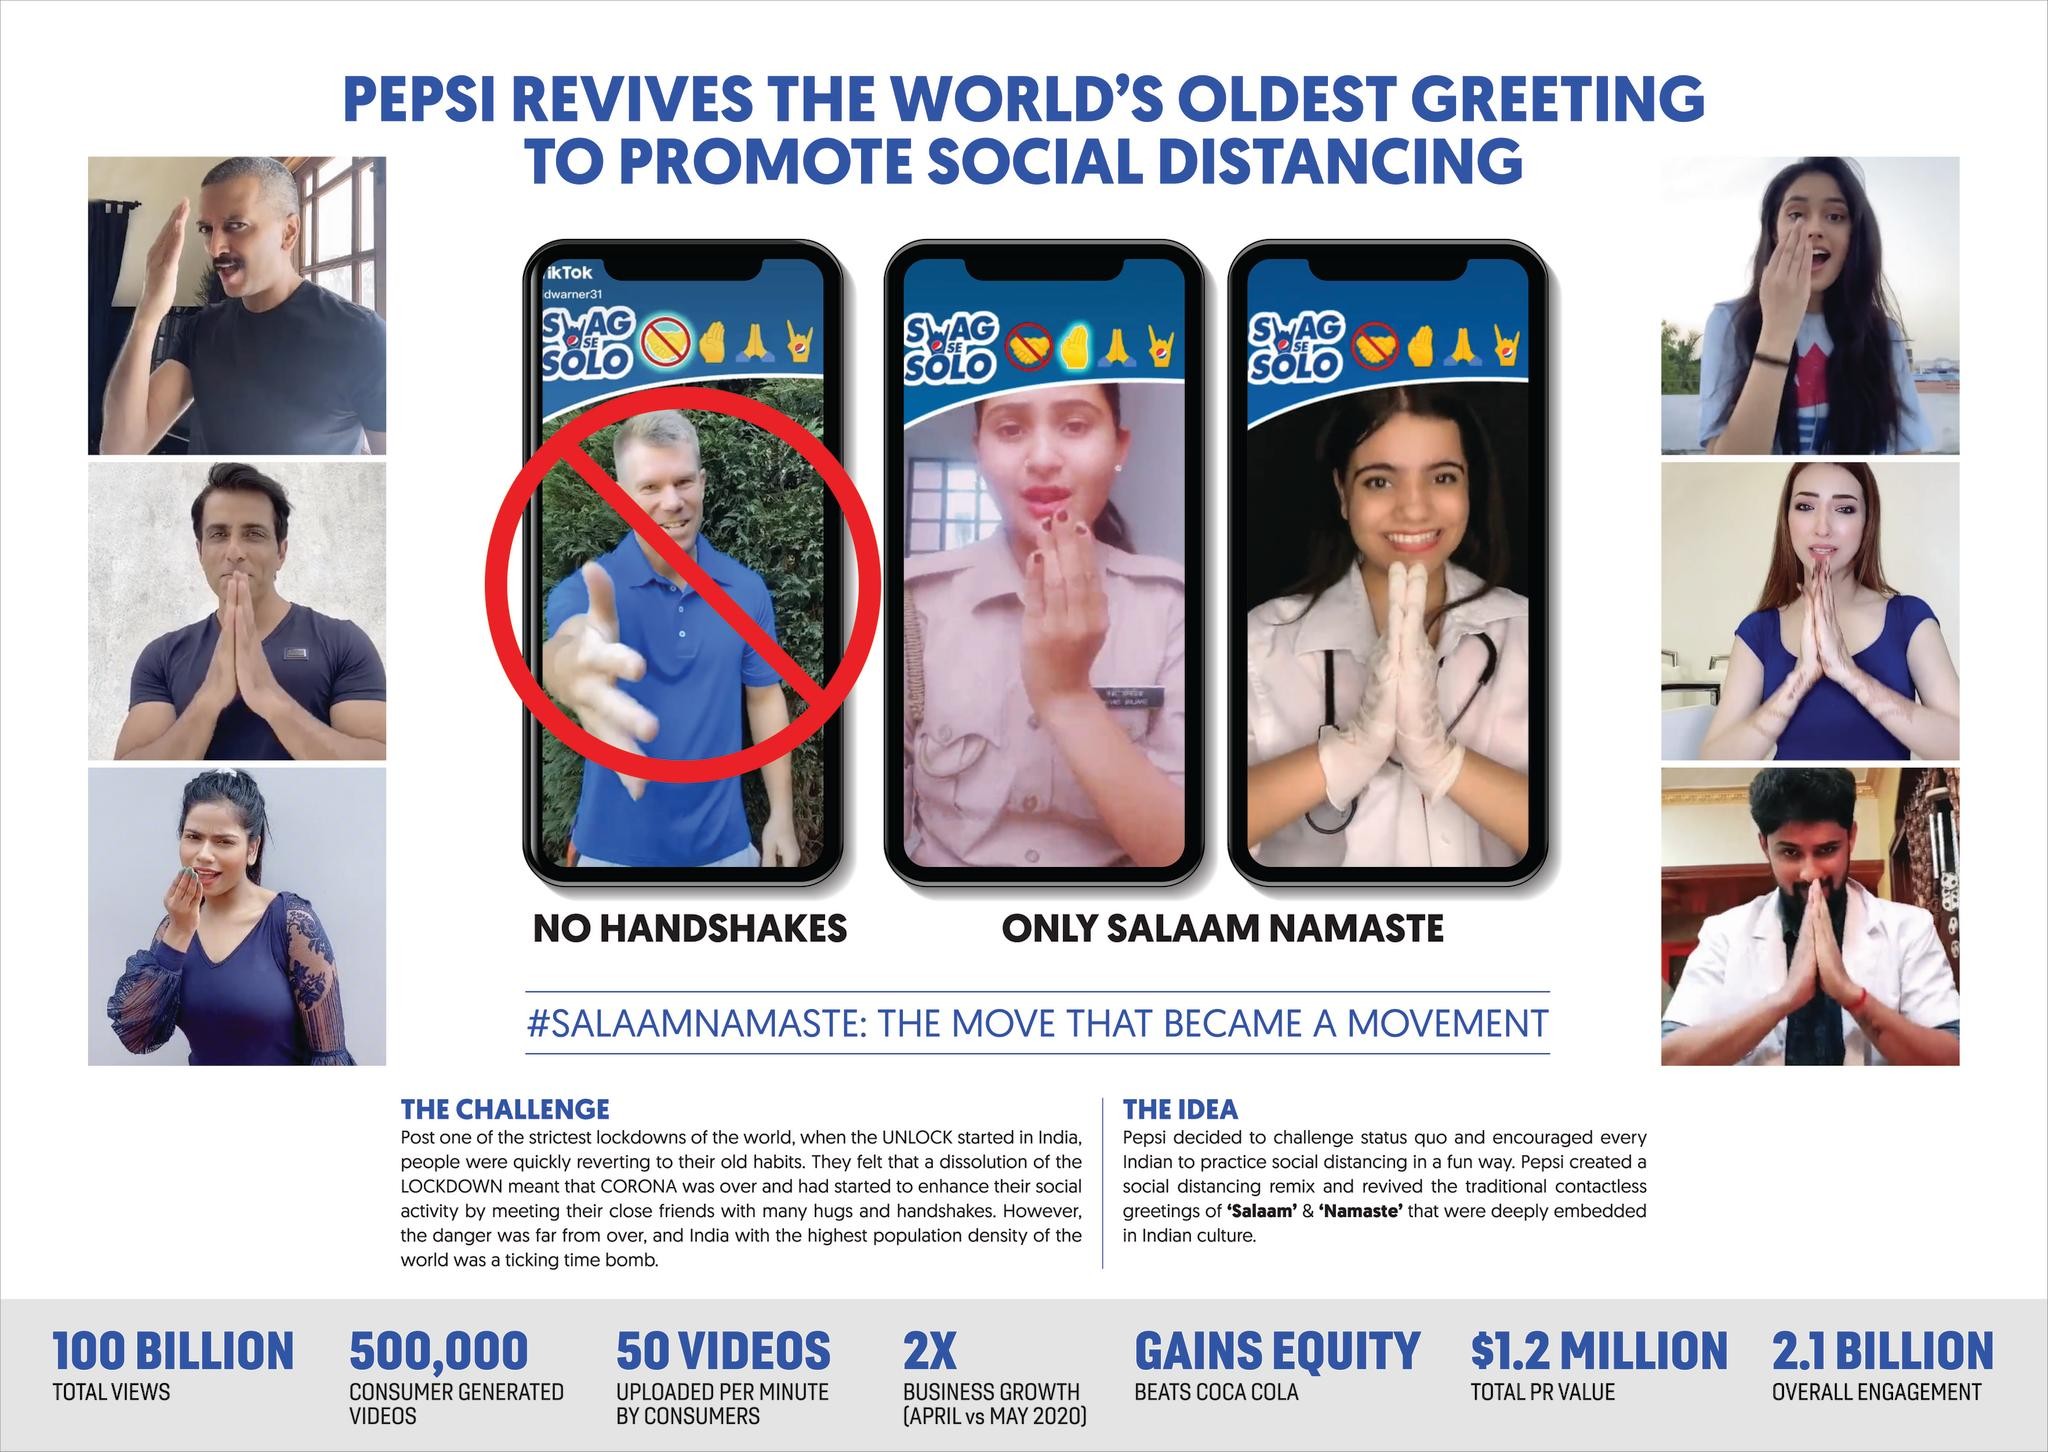 Pepsi revives the world's oldest greeting to promote social distancing